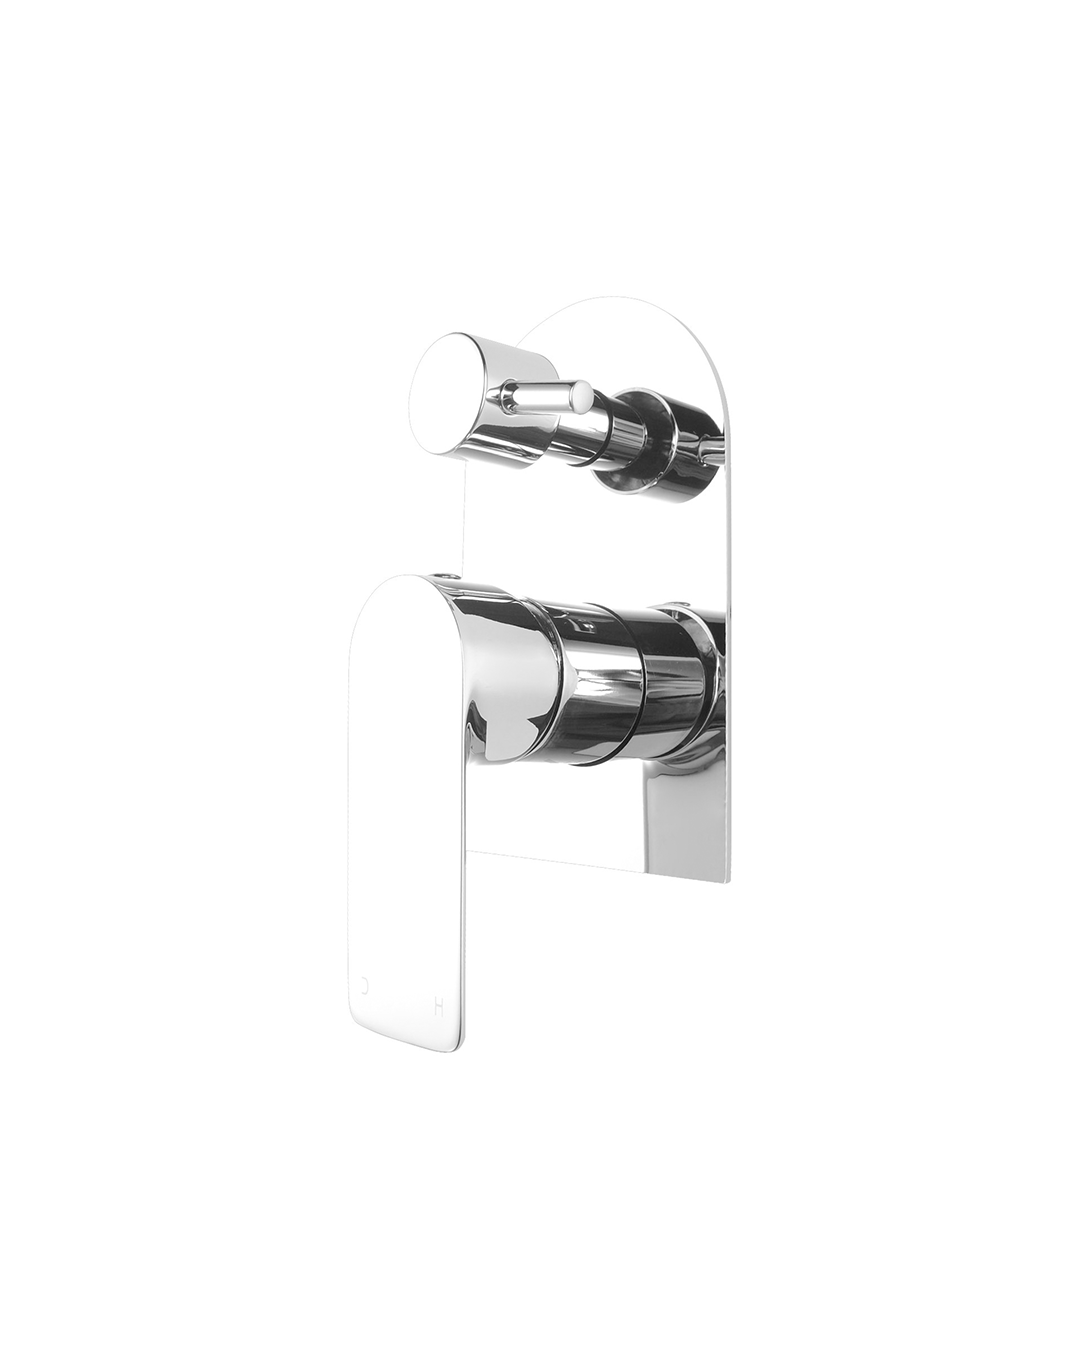 Persano Wall Mixer with Diverter